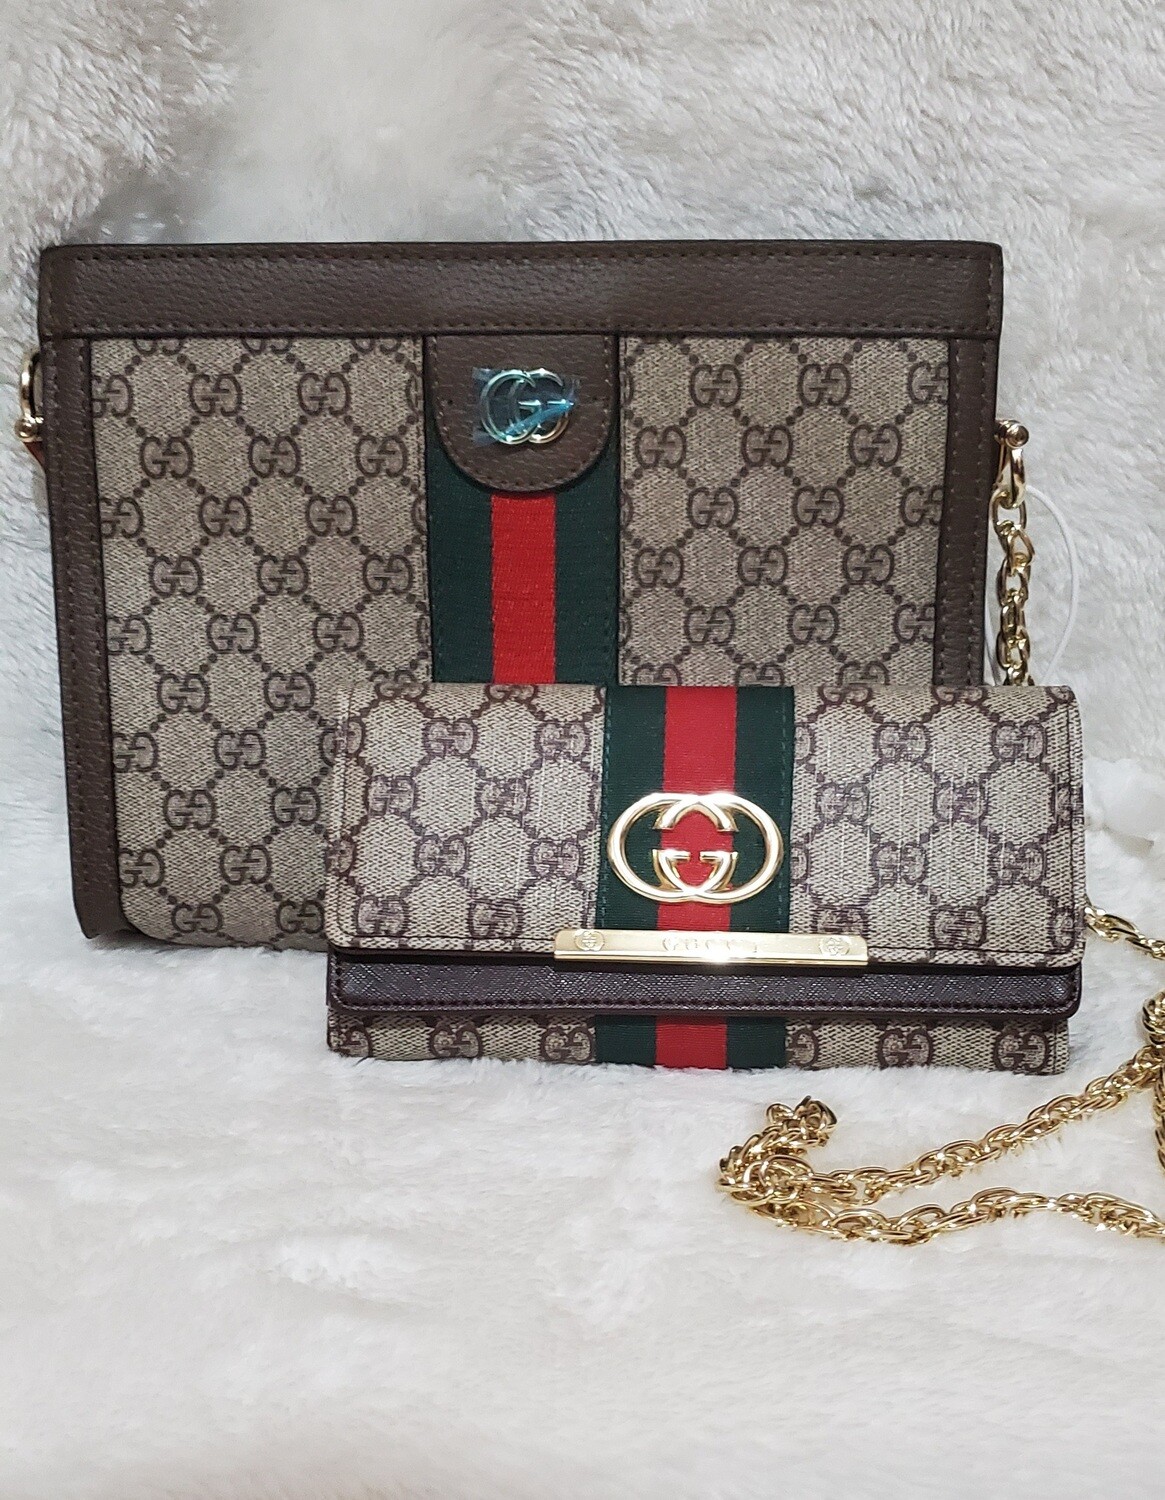 Gucci Ophidia small shoulder bag with wallet